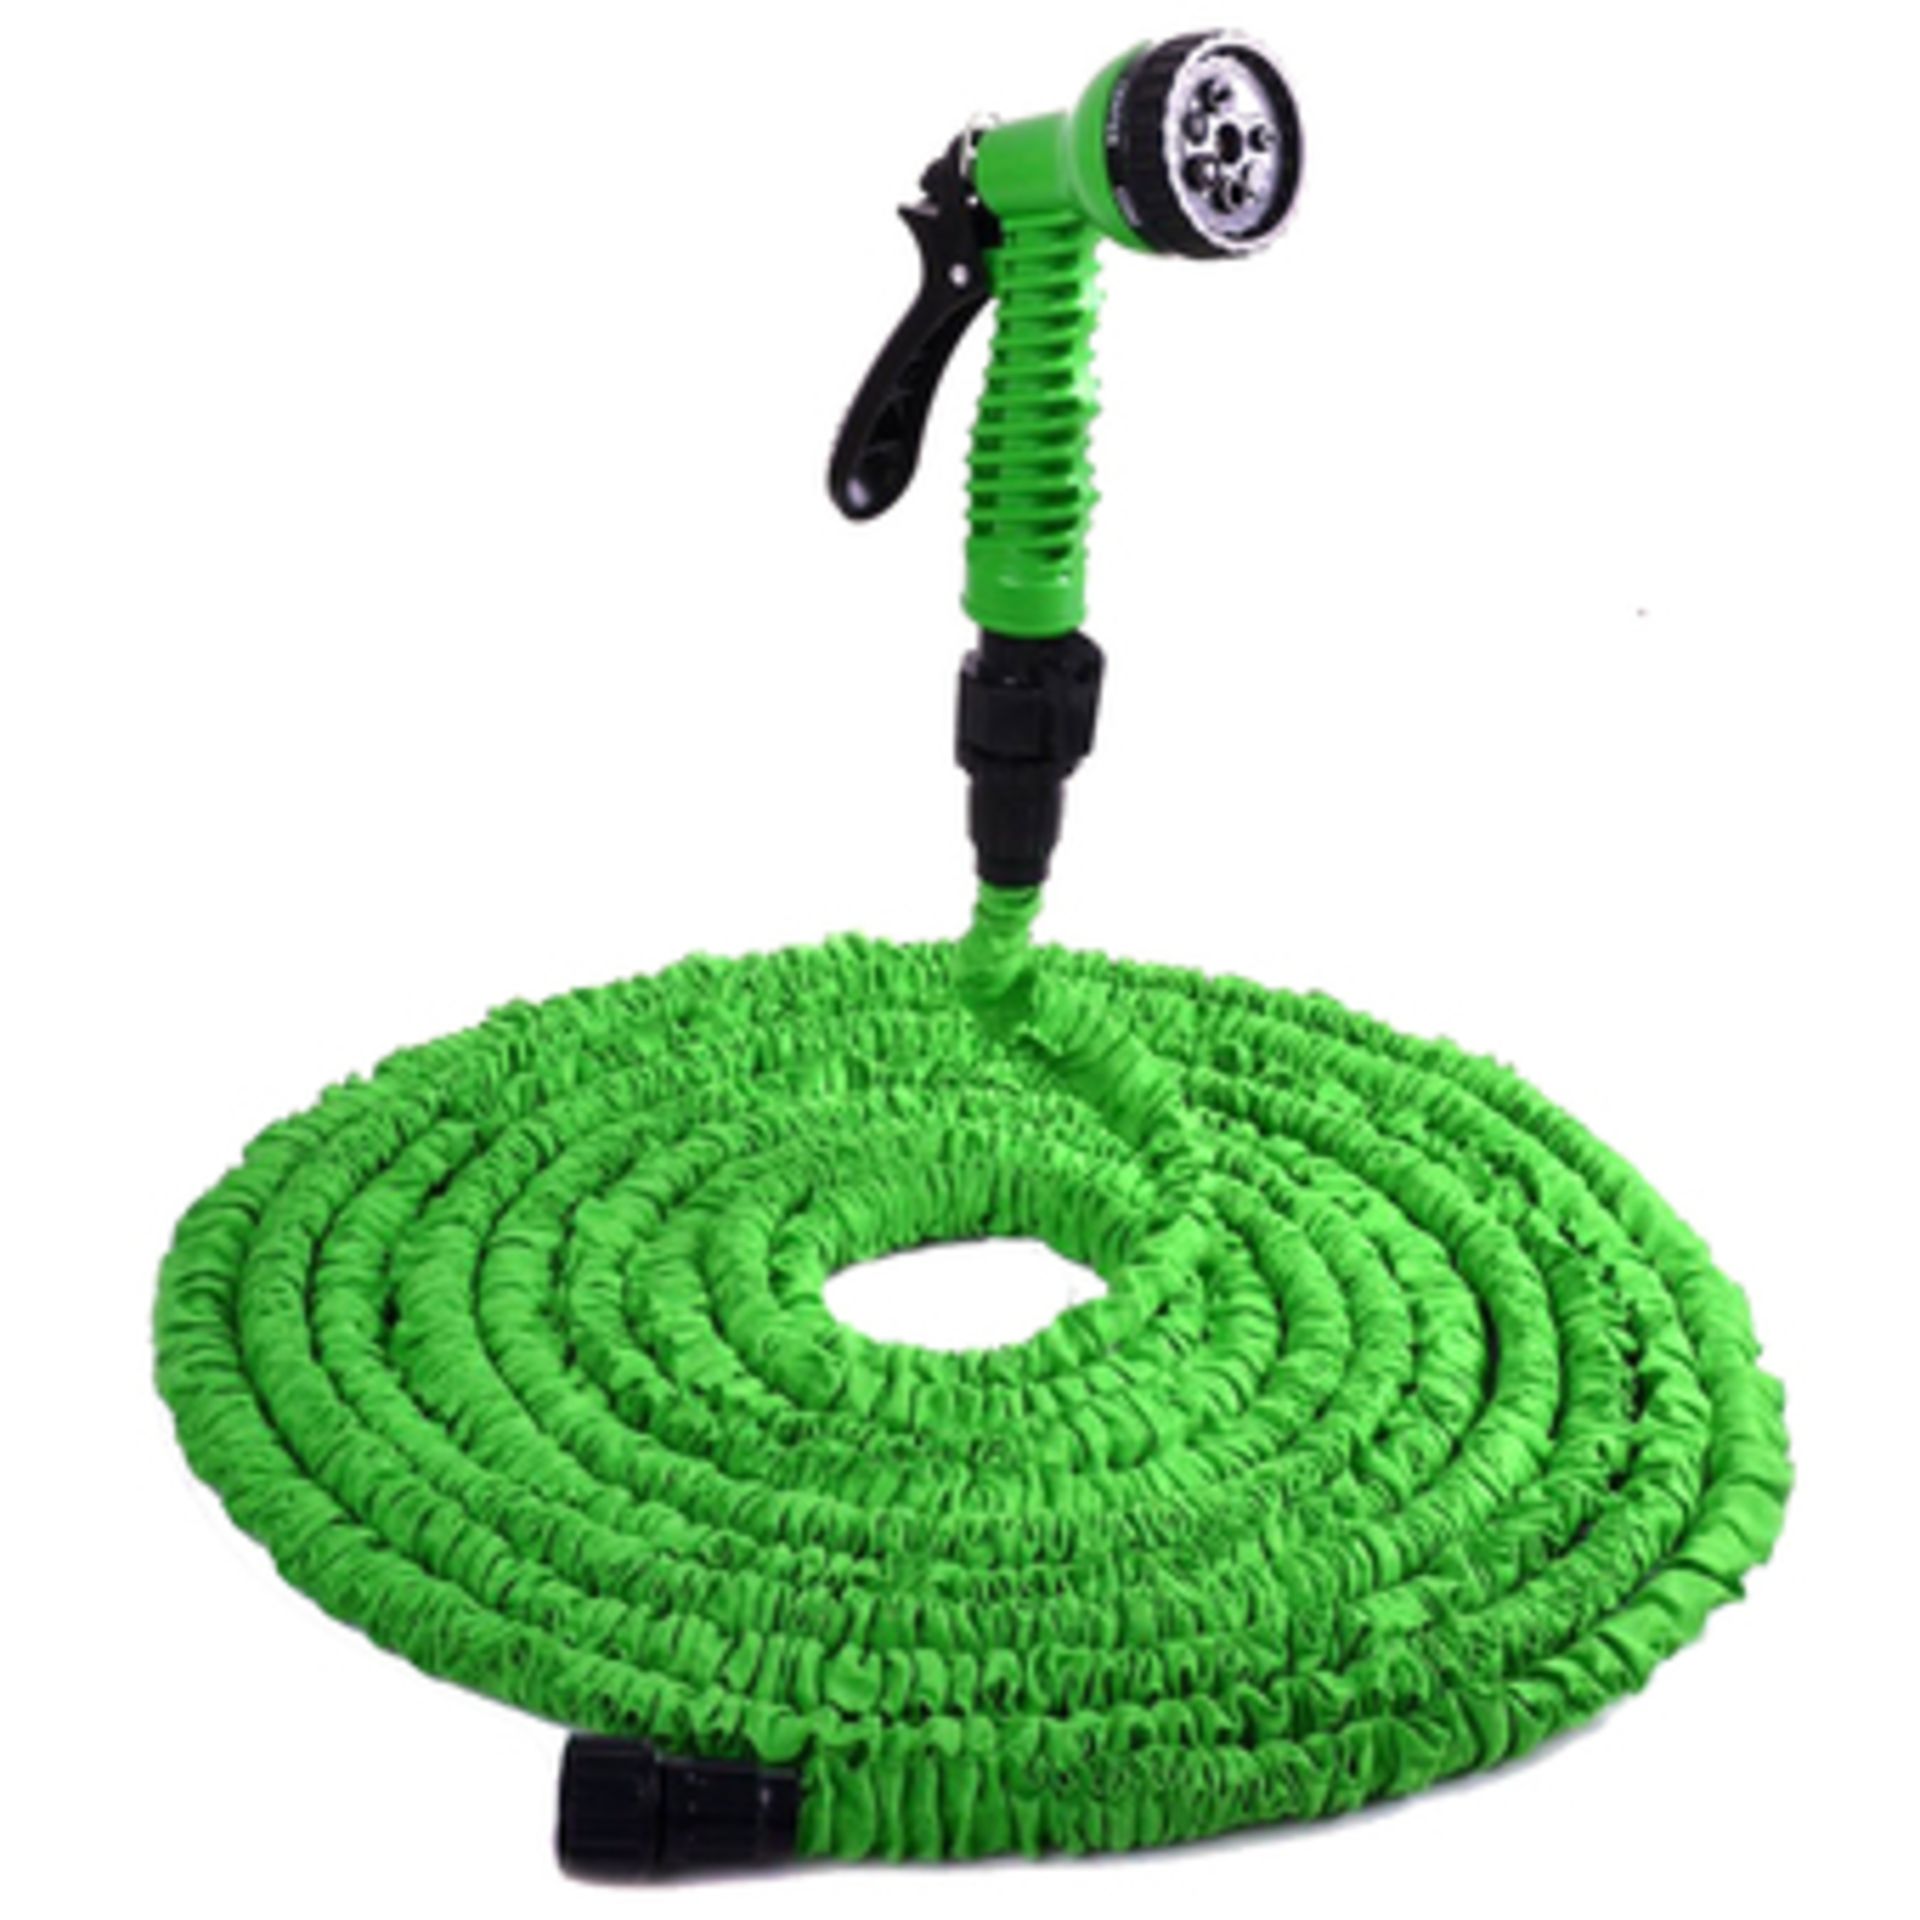 V Brand New 25 Foot Expanding Hose RRP39.99 Colour May Vary X 2 YOUR BID PRICE TO BE MULTIPLIED BY